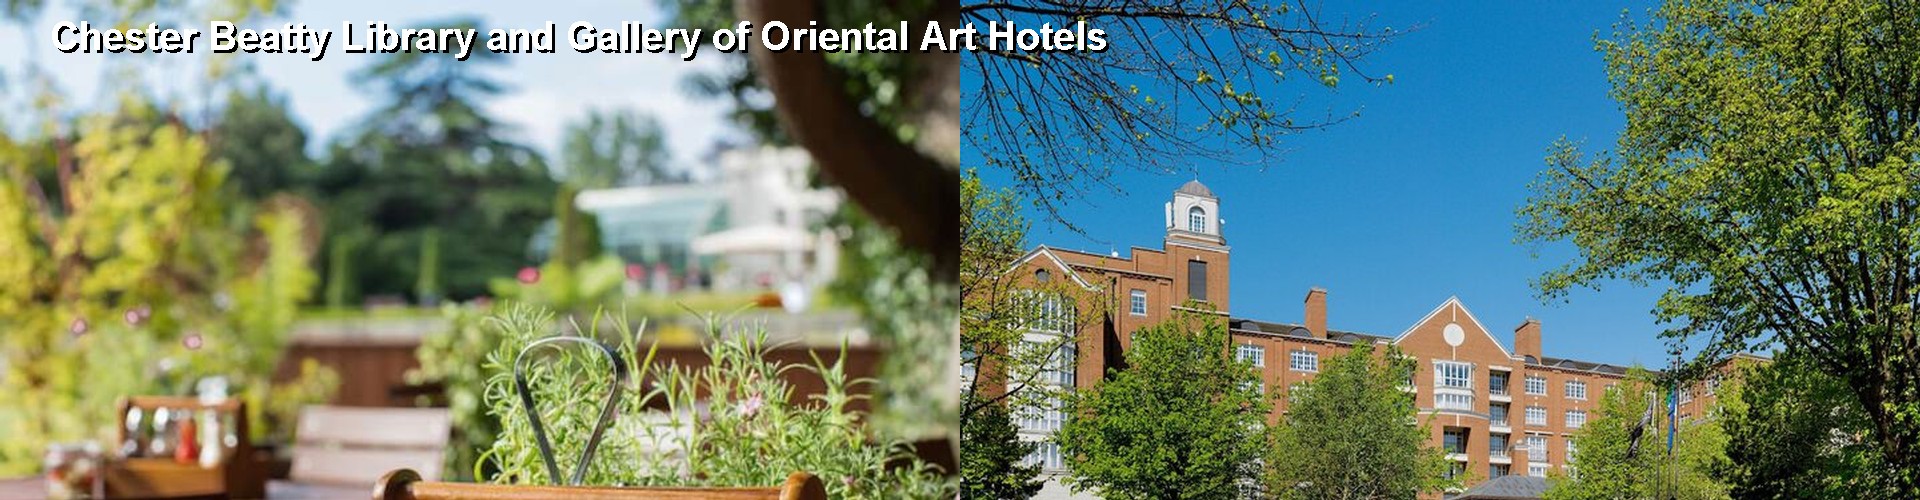 5 Best Hotels near Chester Beatty Library and Gallery of Oriental Art